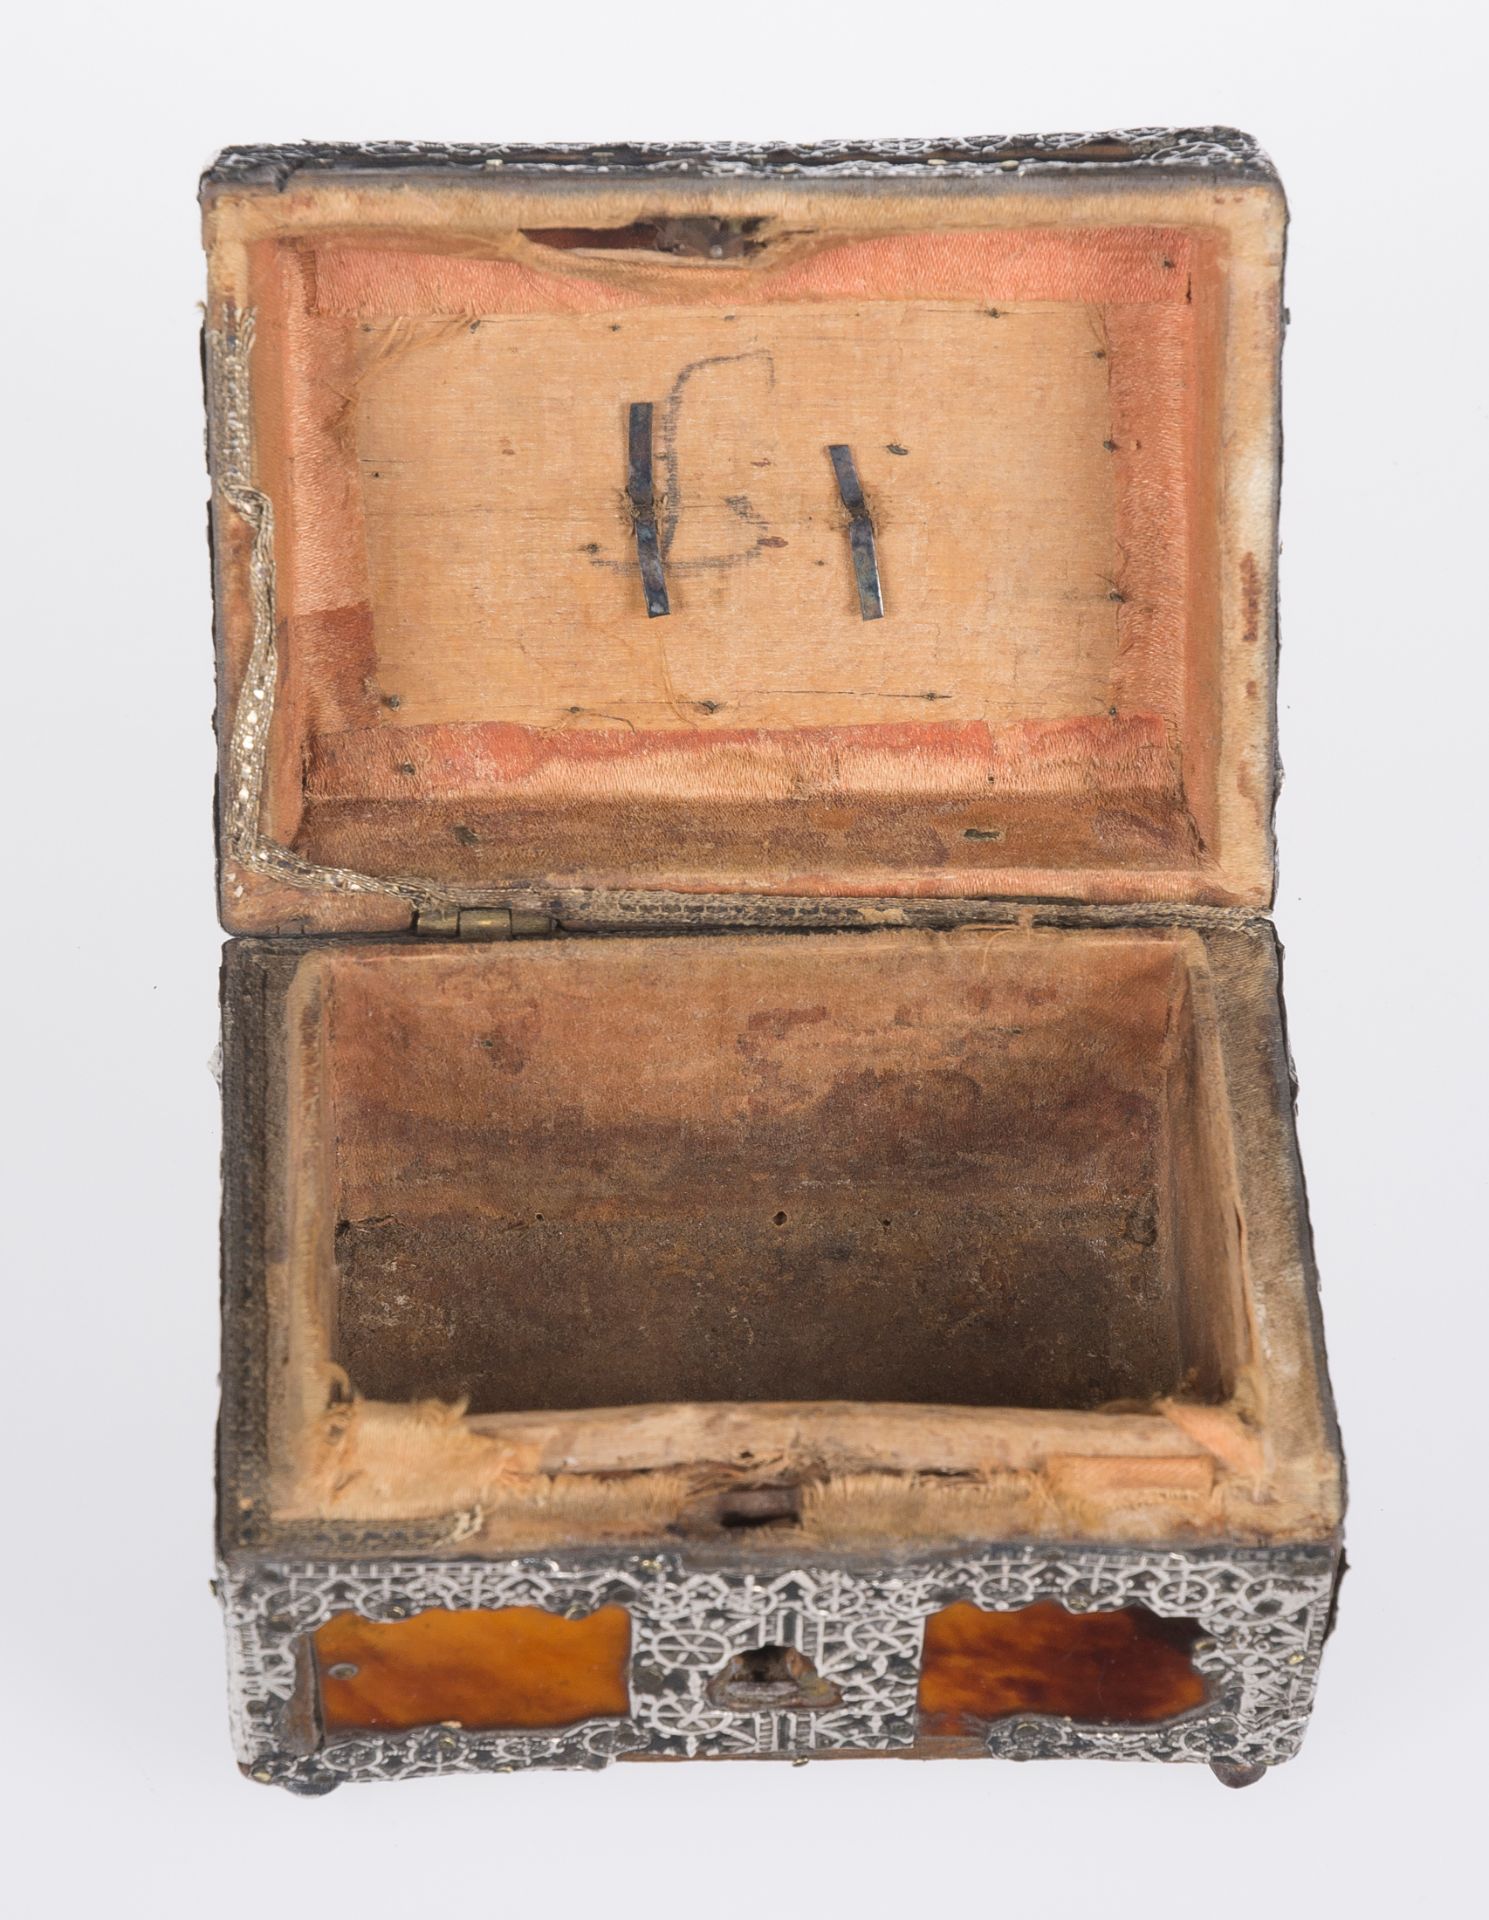 Small wooden chest covered in tortoiseshell and silver. Dutch colonies. Indonesia. 17th century. - Image 6 of 6